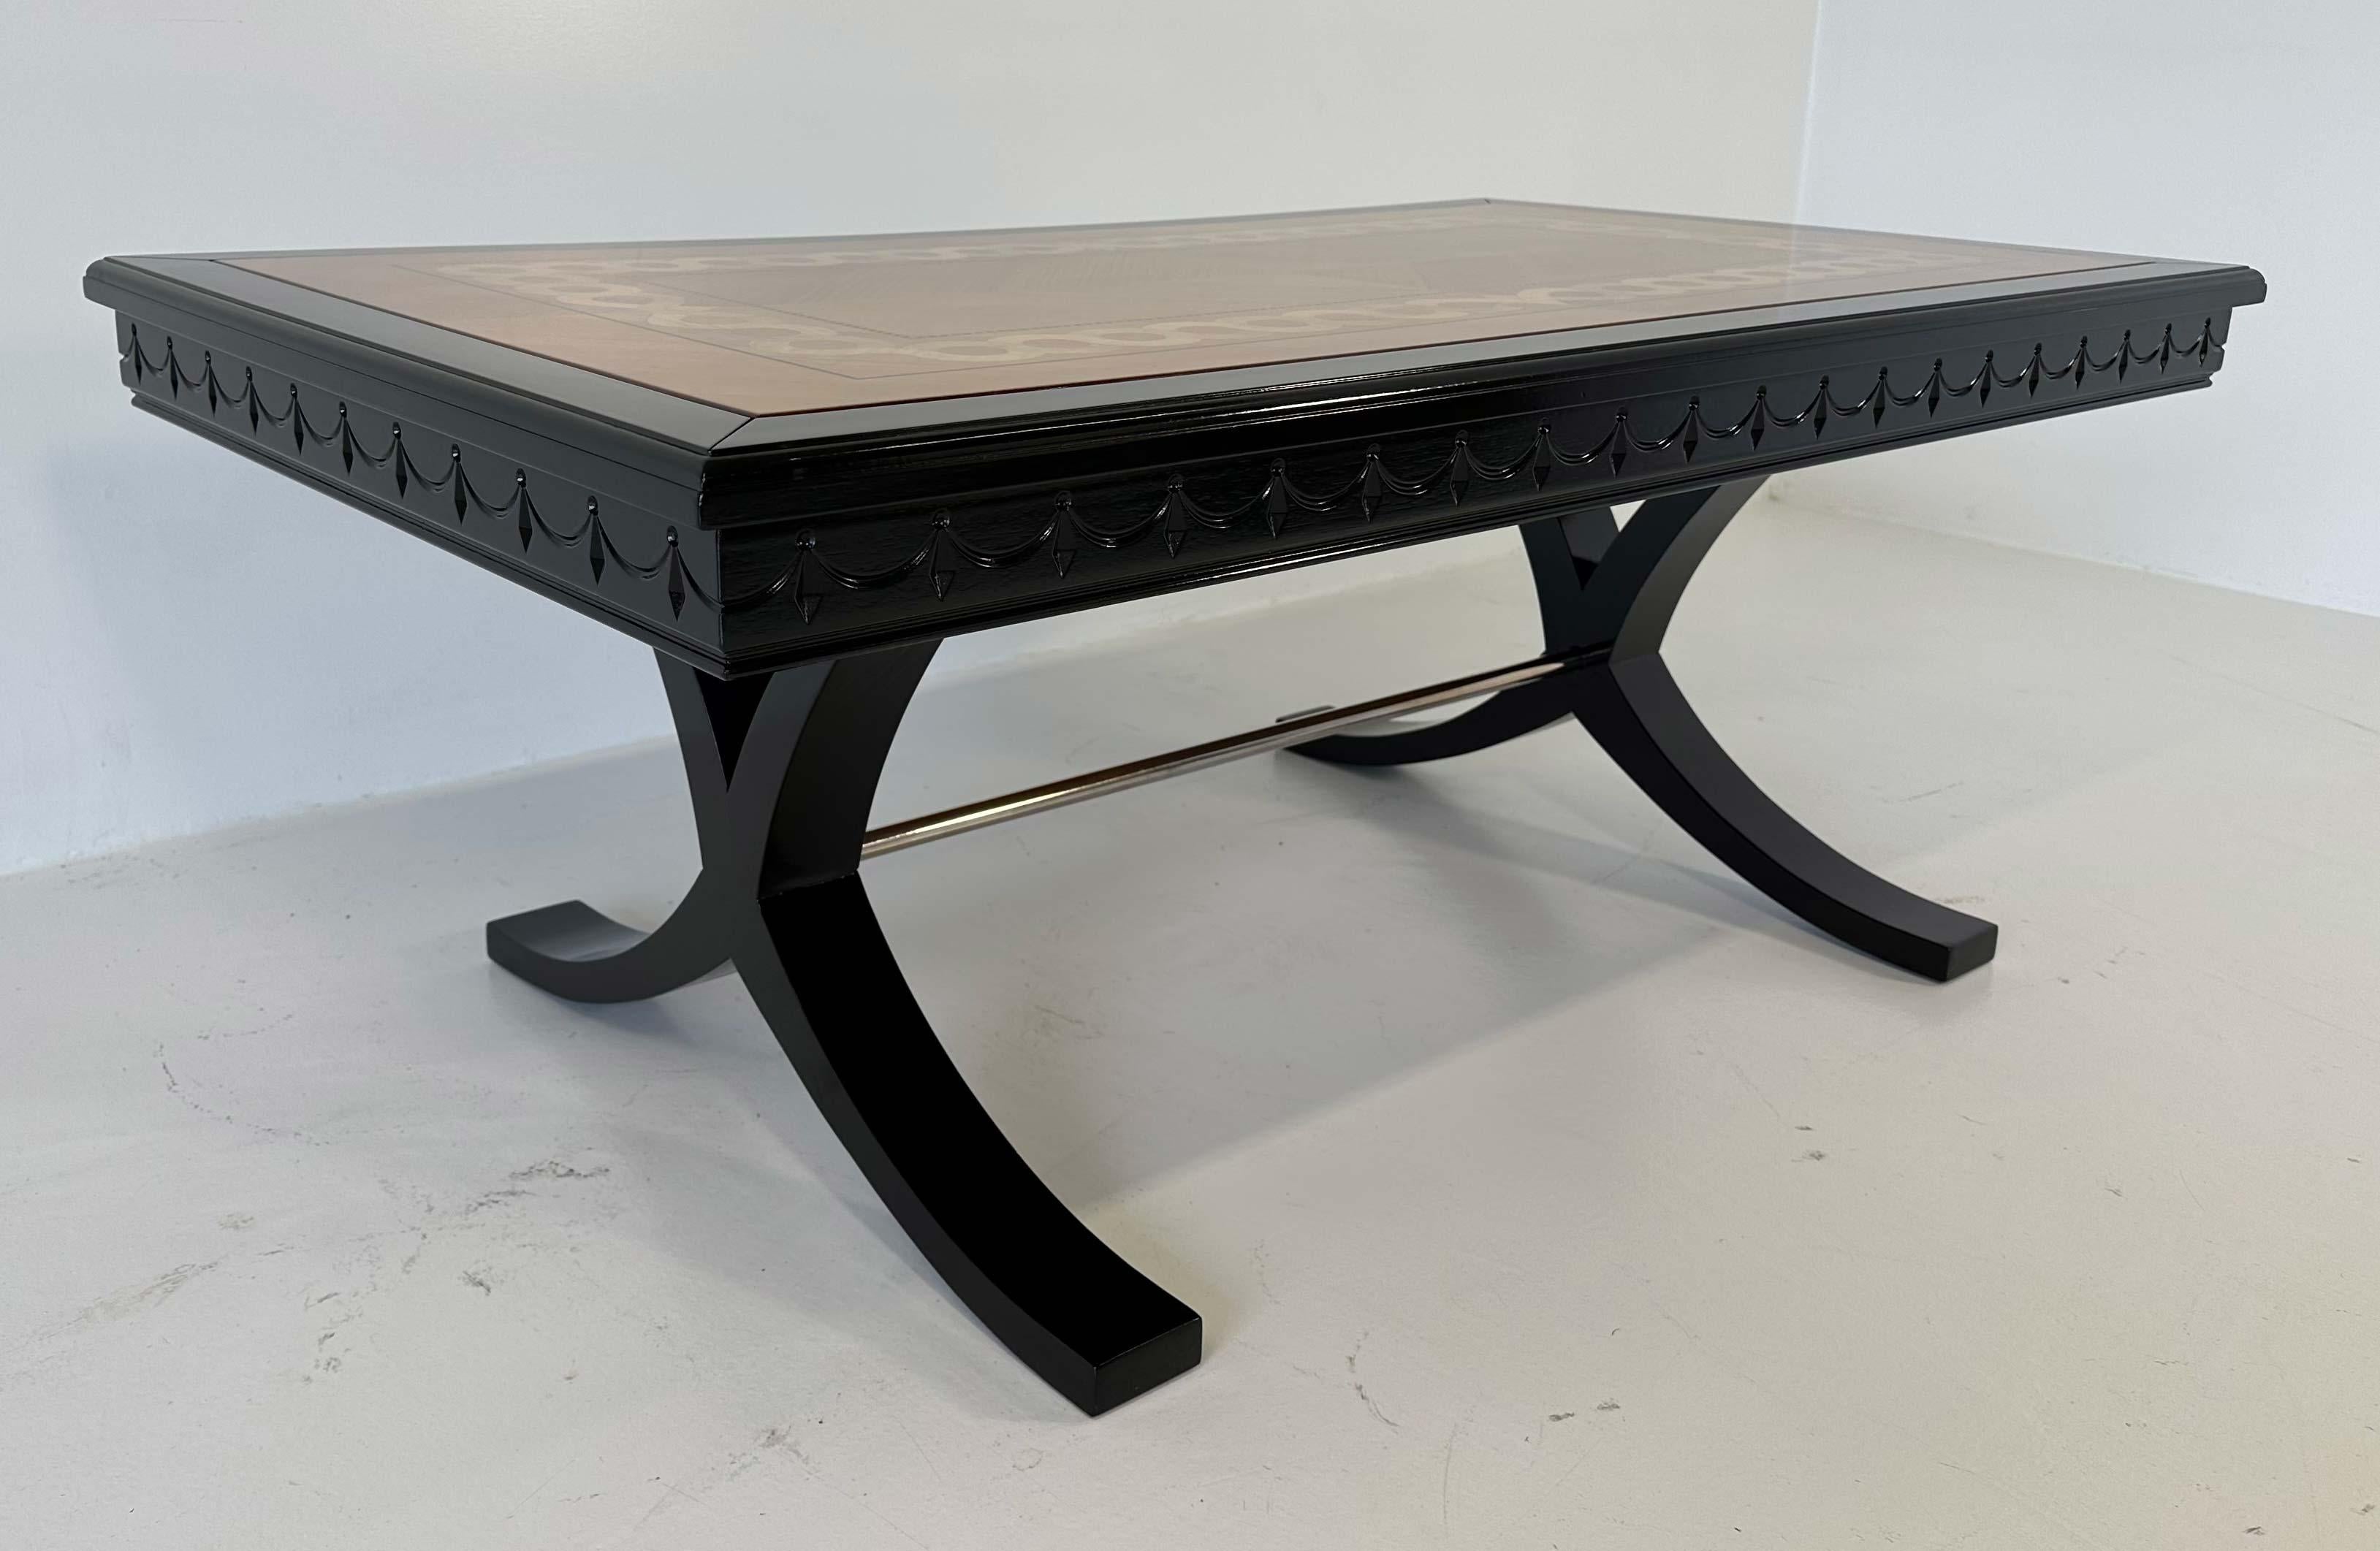 Italian Art Deco Style Maple and Ash Wood Inlaid Coffee Table, 1980s For Sale 1